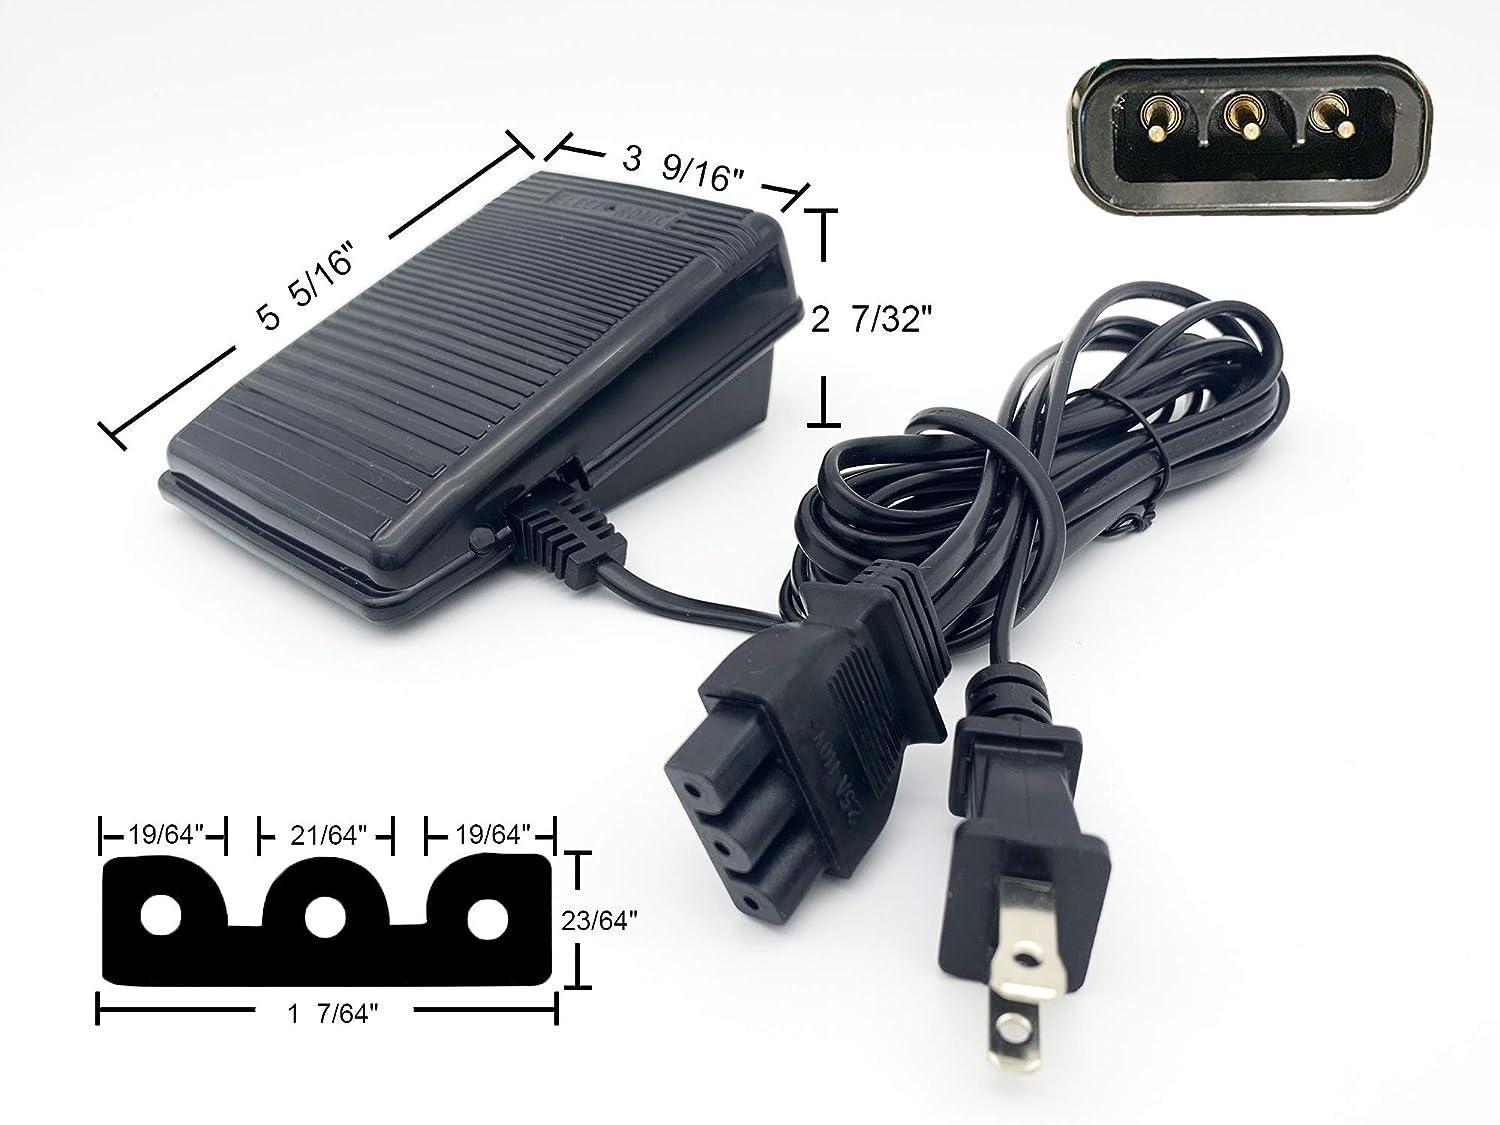 BRIGHTLYLIT Foot Pedal and Power Cord for Singer Sewing Machine D